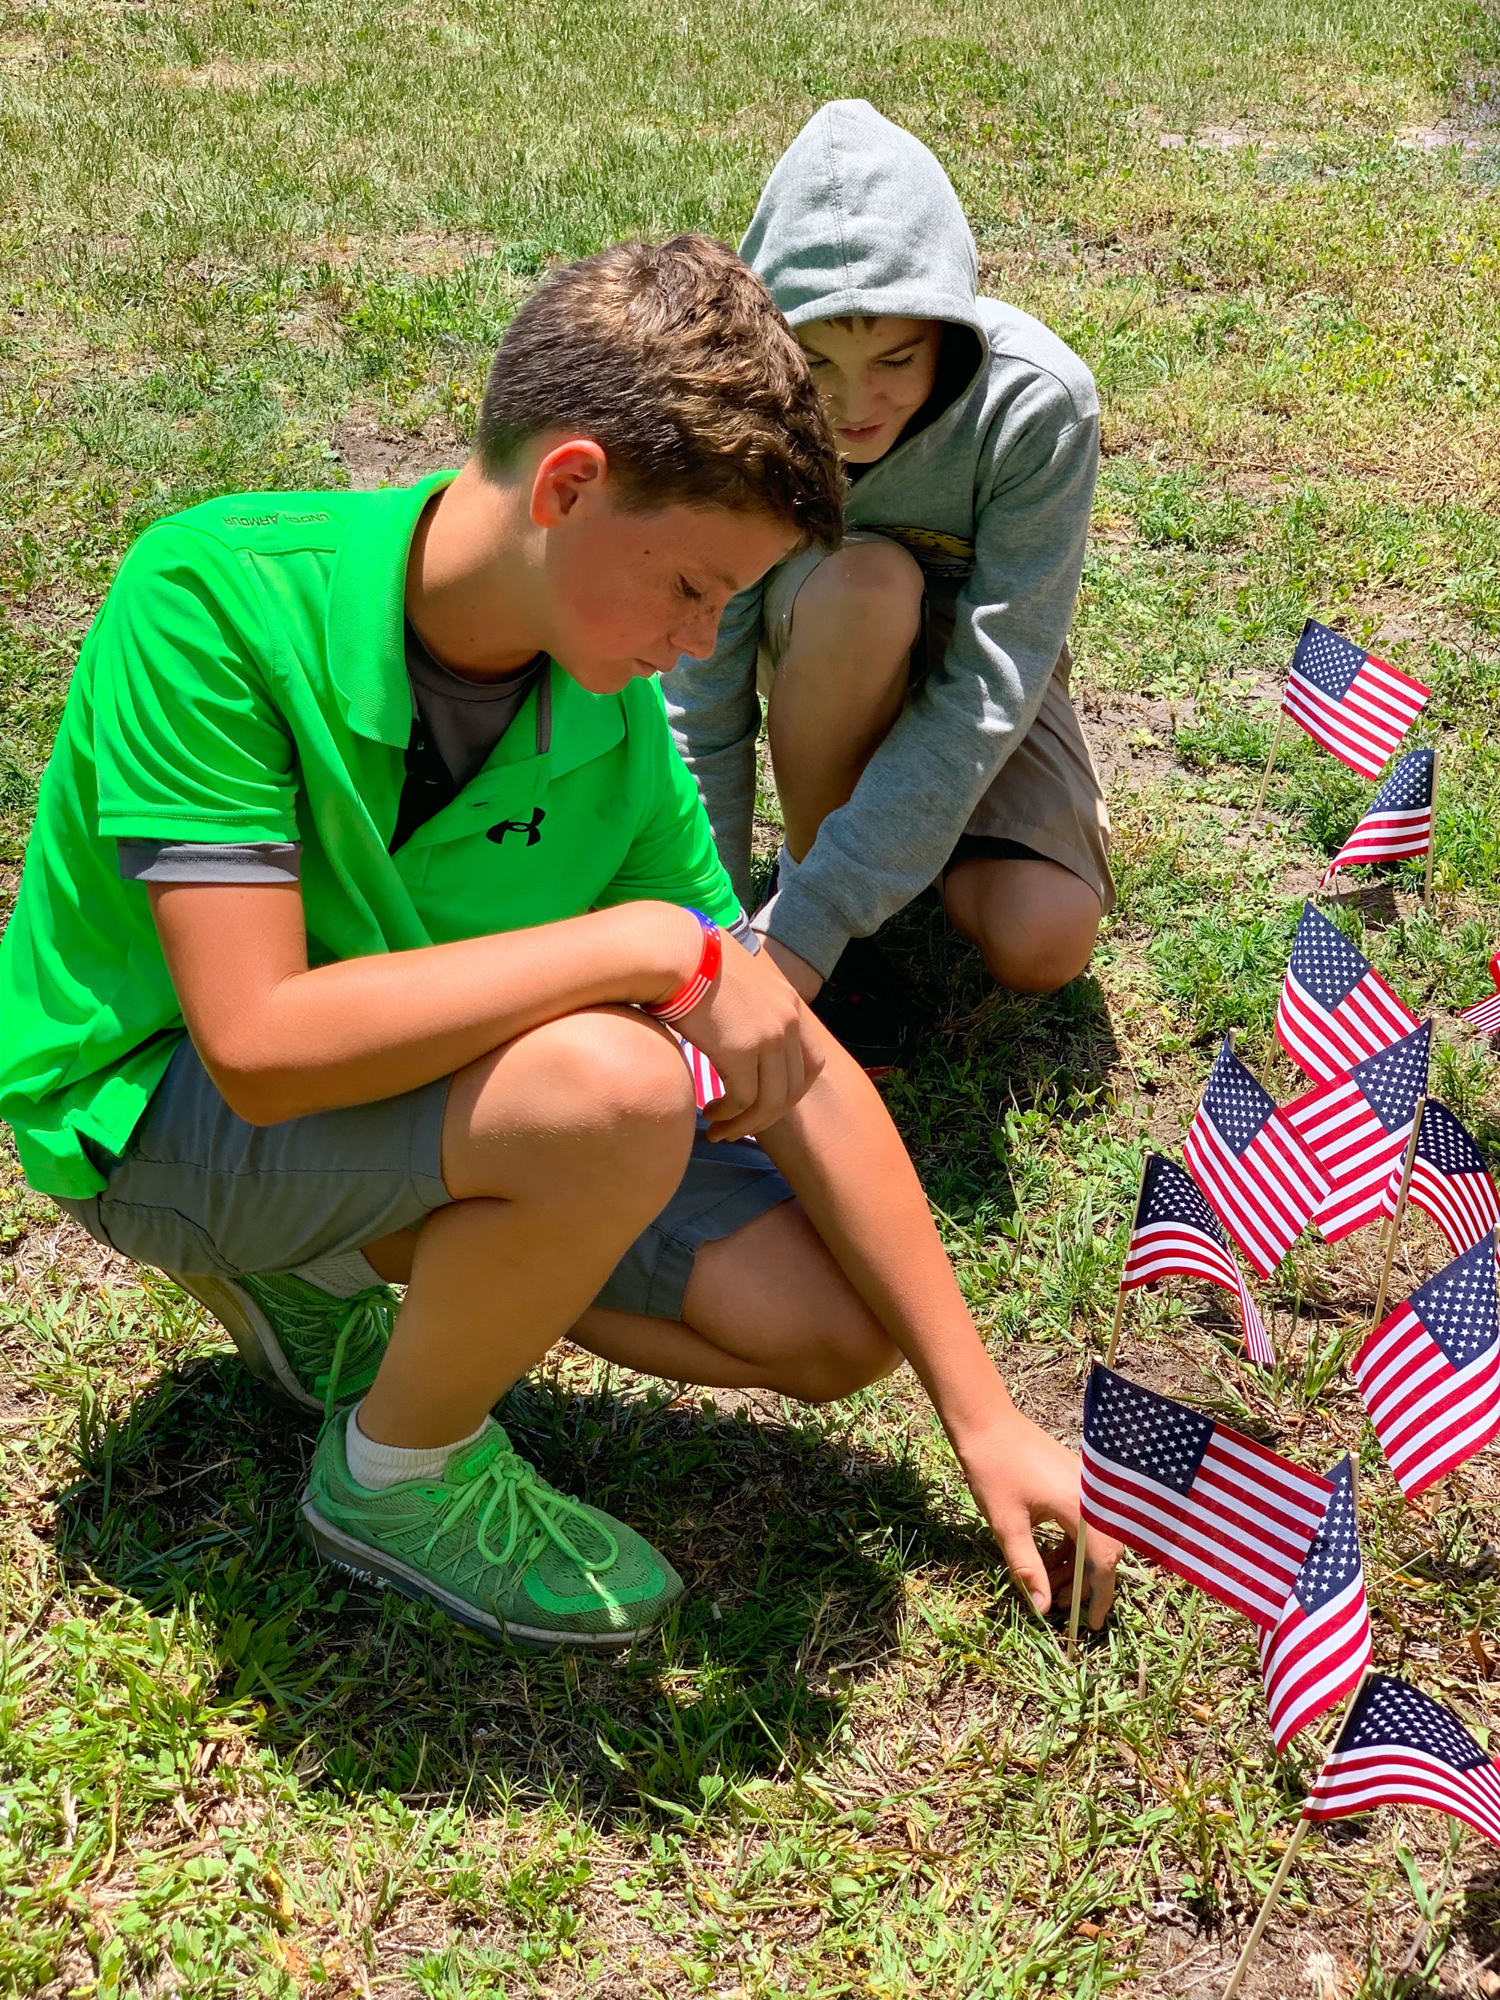 BES fifth graders Luke Middleton and John Melton plant American flags in honor of Memorial Day. Photo courtesy of Carmen Stanford